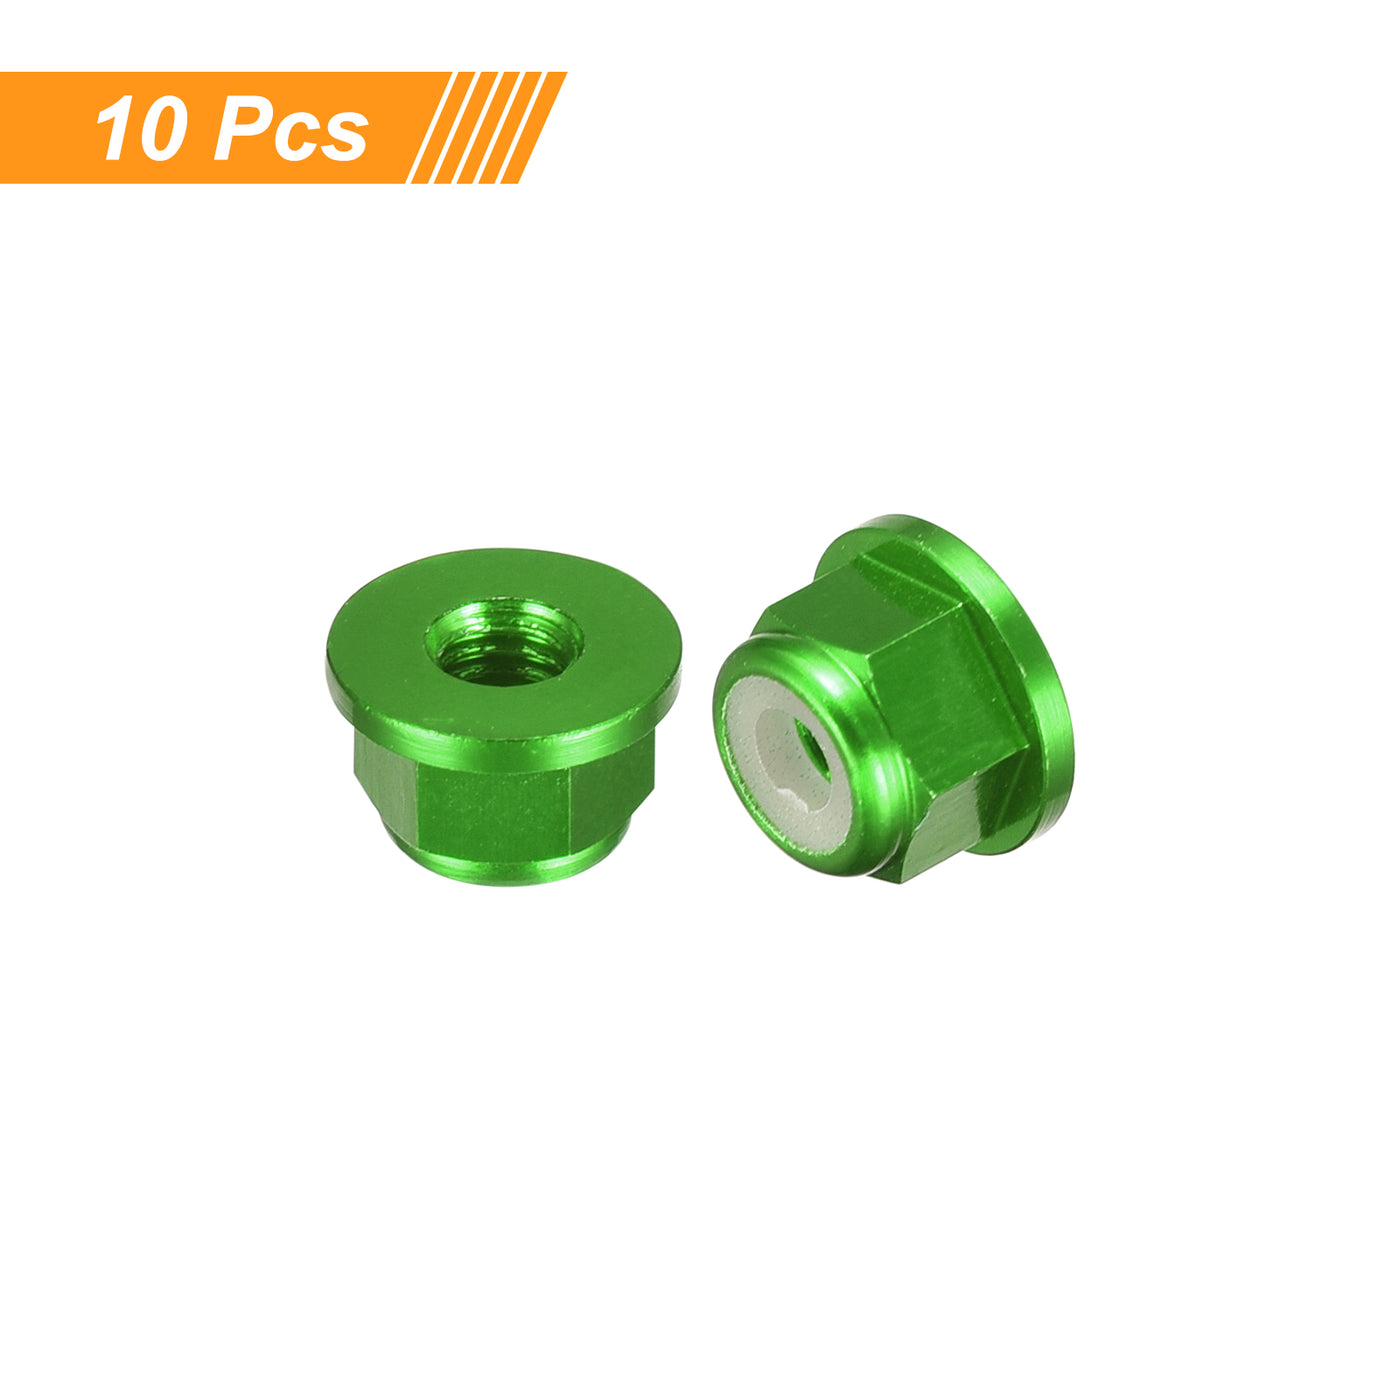 uxcell Uxcell Nylon Insert Hex Lock Nuts, 10pcs - M3 x 0.5mm Aluminum Alloy Self-Locking Nut, Anodizing Flange Lock Nut for Fasteners (Green)